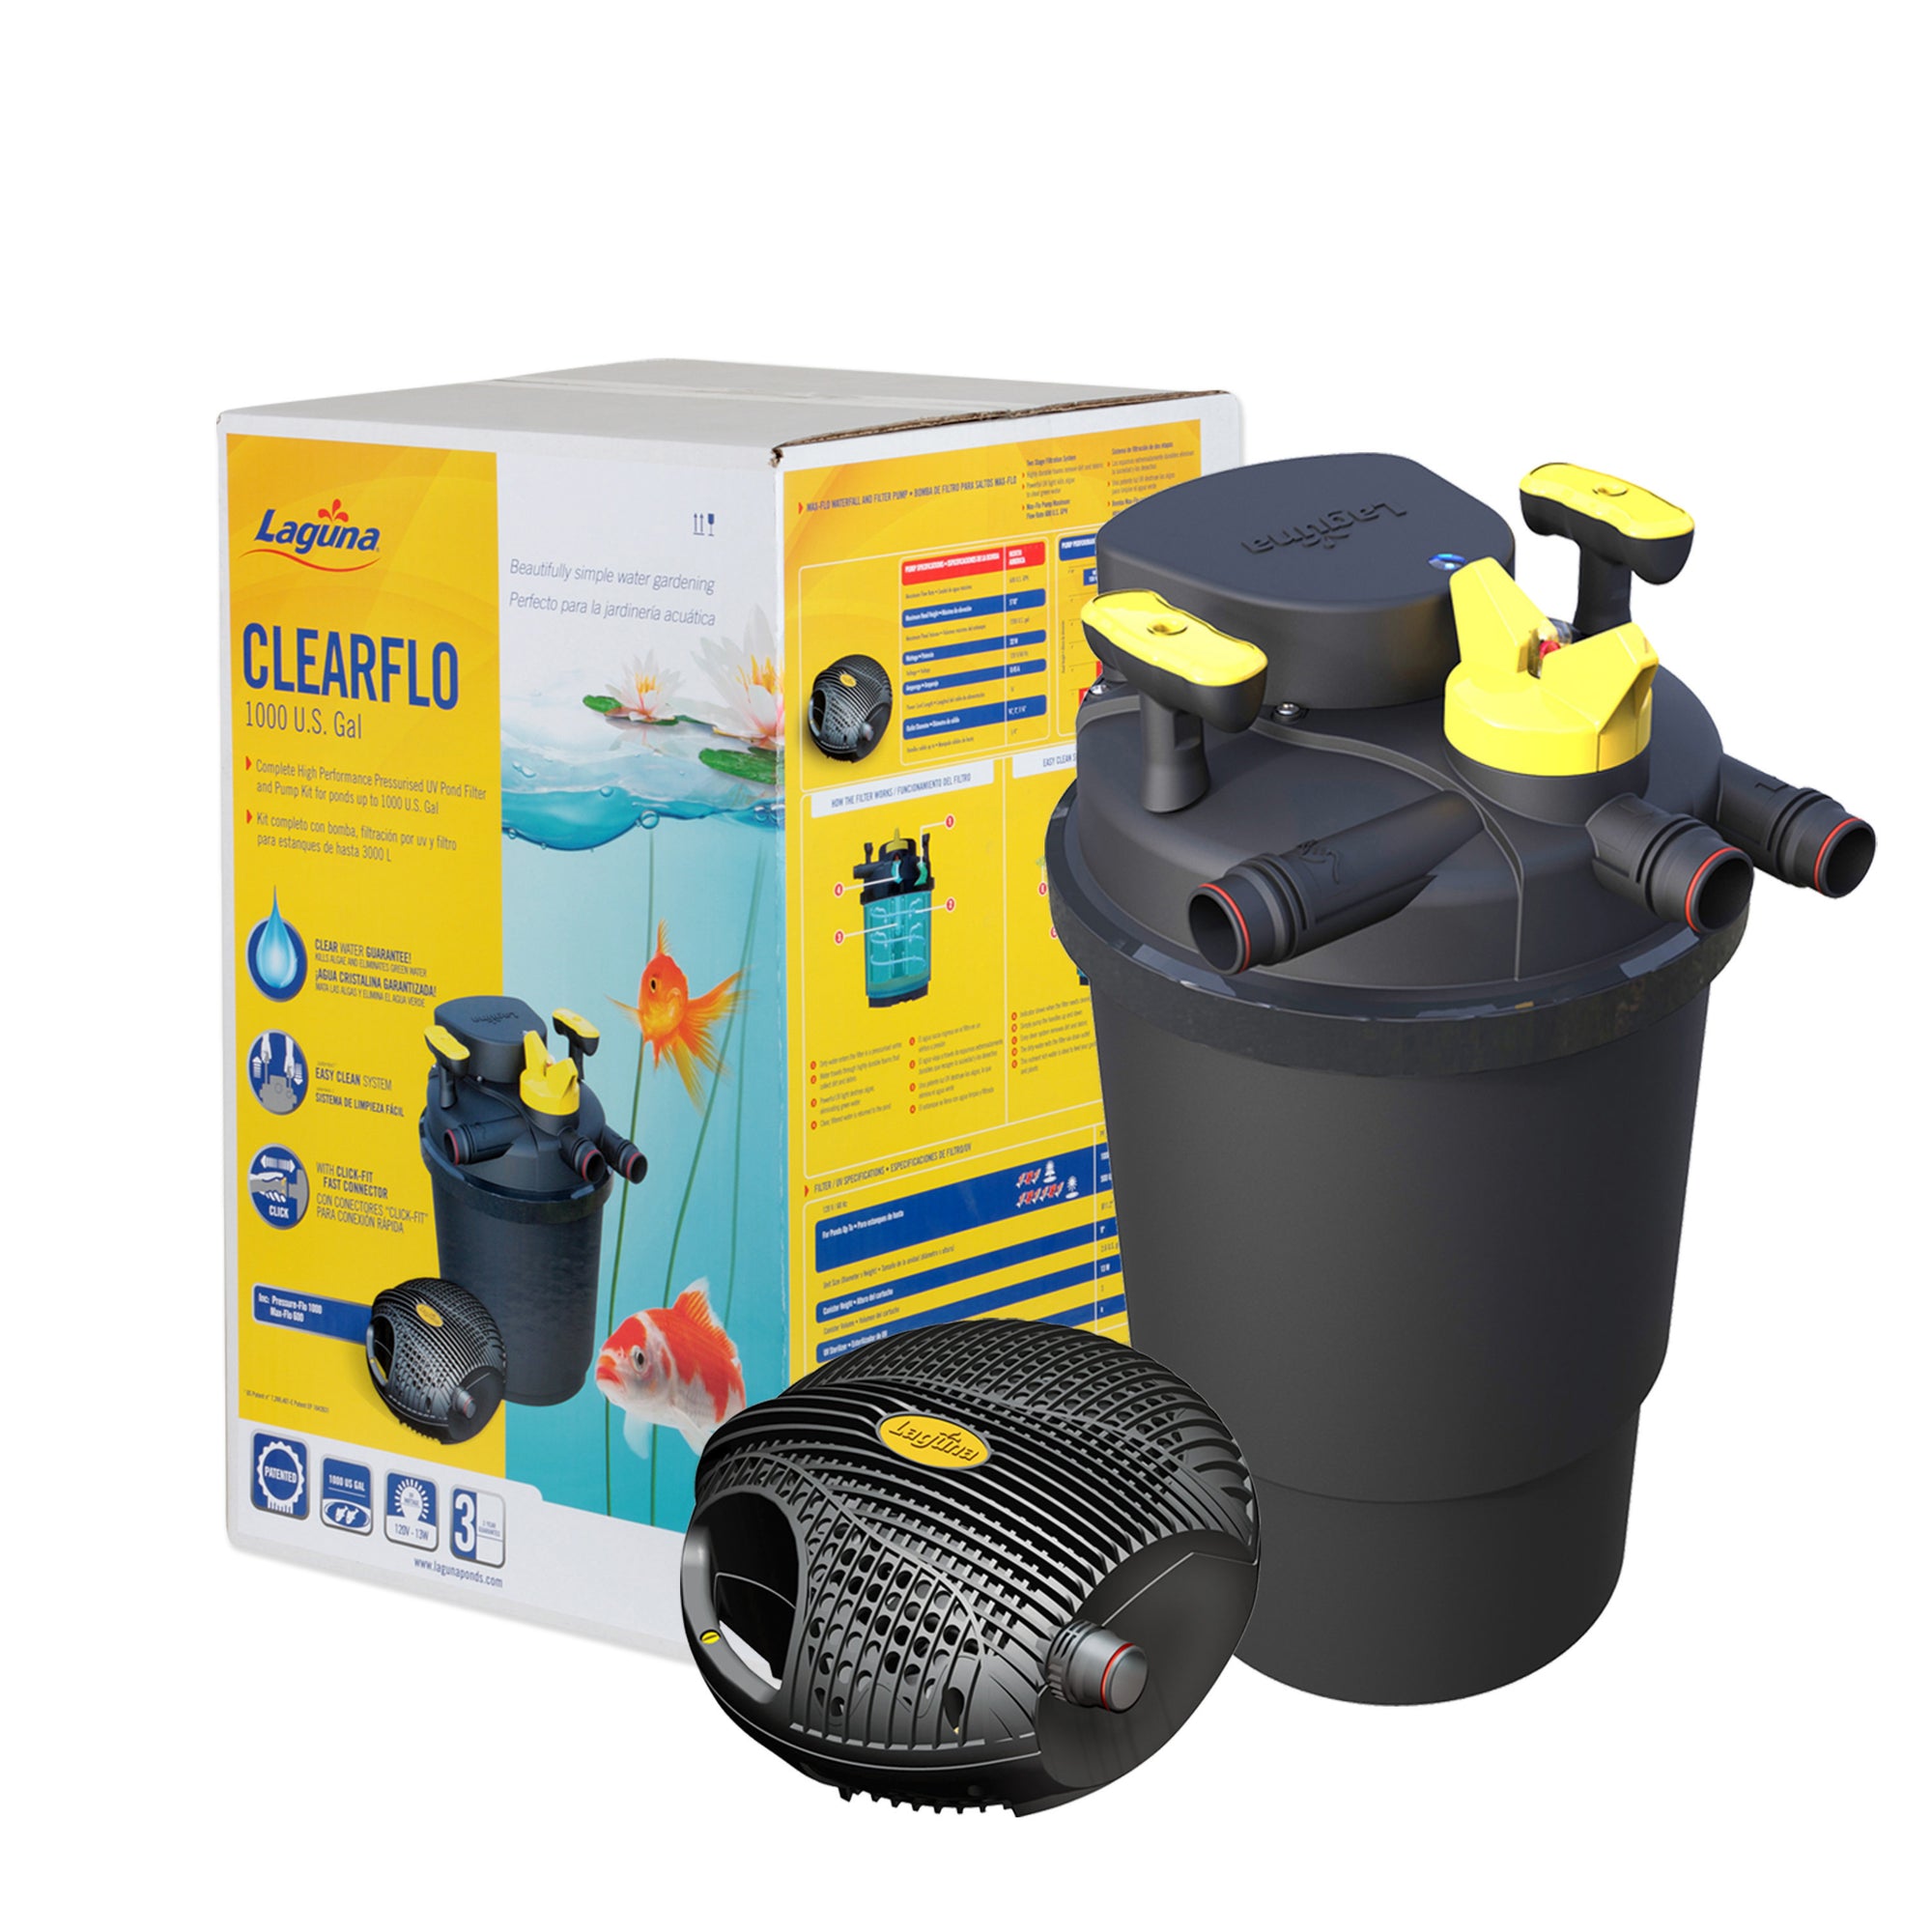 Laguna ClearFlo 1000 Complete Pump, Filter and UV Kit - For ponds up to 1000 US gal (3000 L)